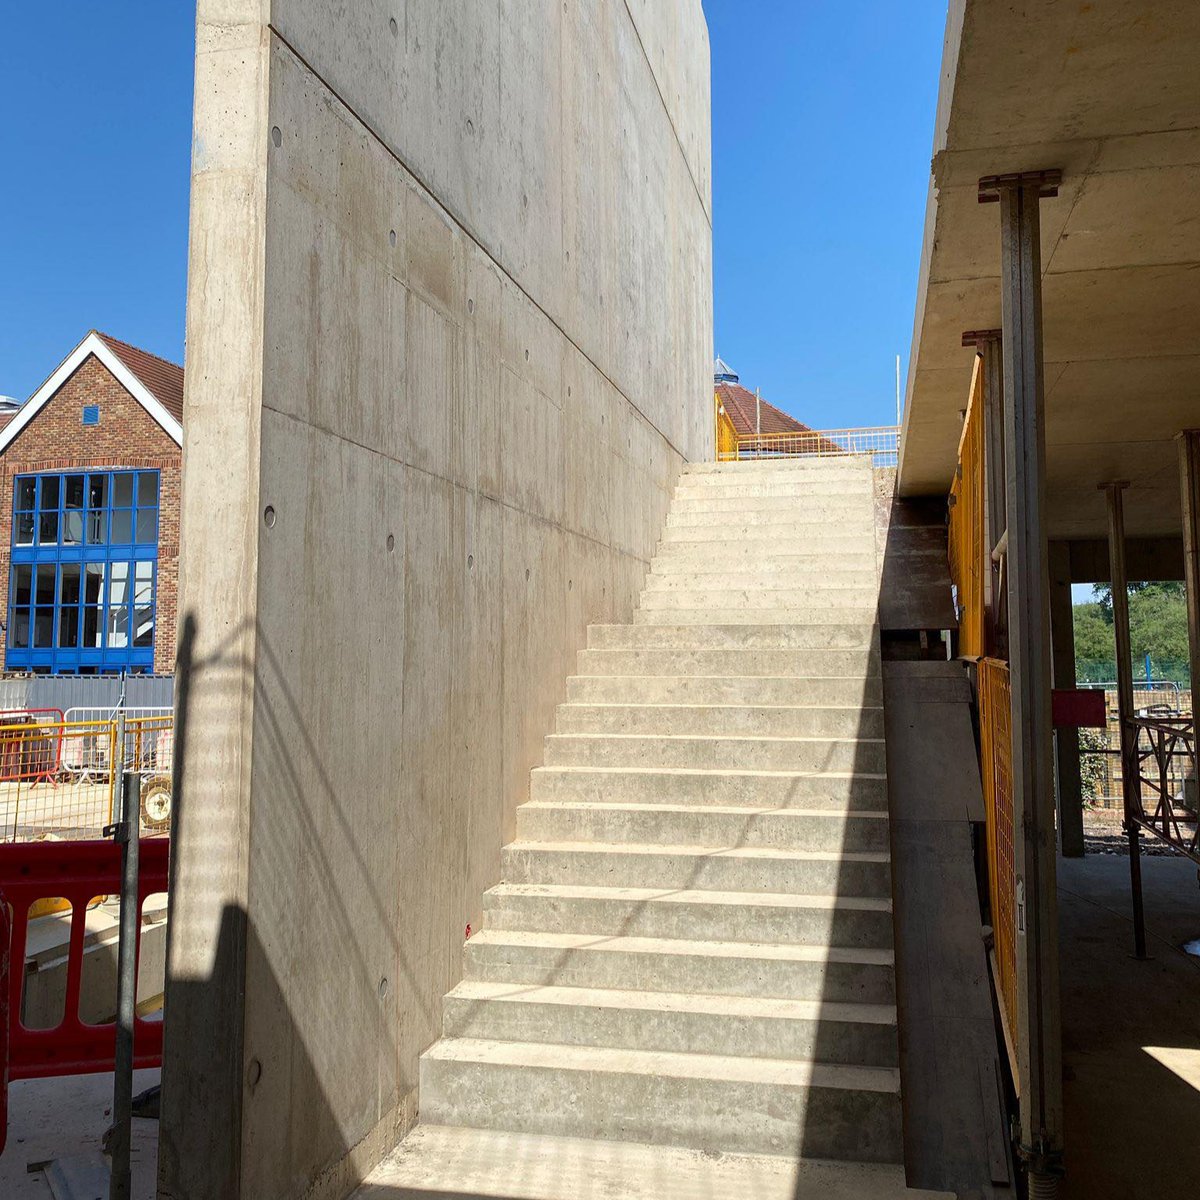 Our project at the Dragon School, Oxford is starting to take shape. Internal in-situ staircases are now complete and the 1st-floor steel frame is currently being erected onto the concrete structure. The SFS, roof structure and blockwork will follow shortly after.